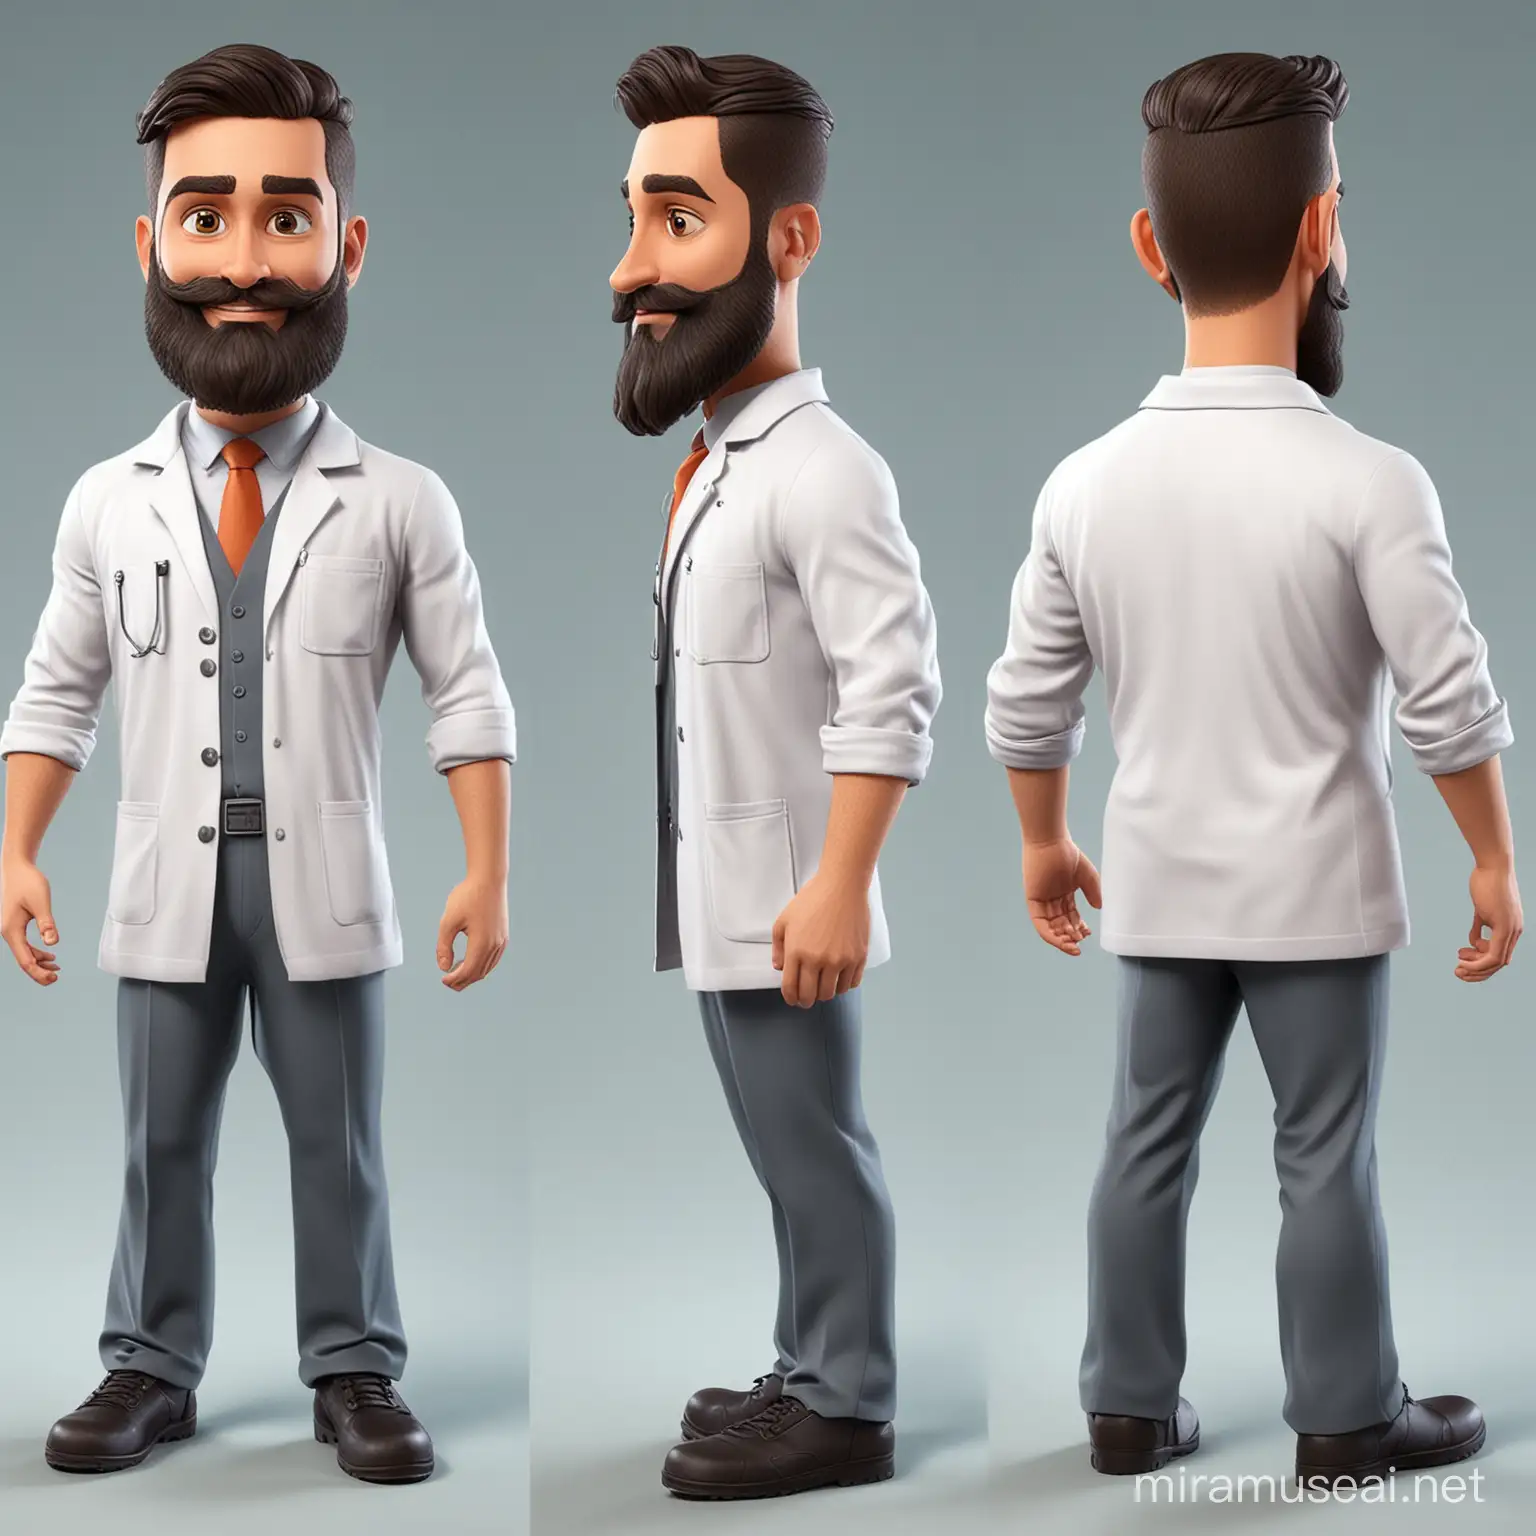 Create a 3D cartoon male working in health industry in UAE, full image from head to toe, the guy should have beard